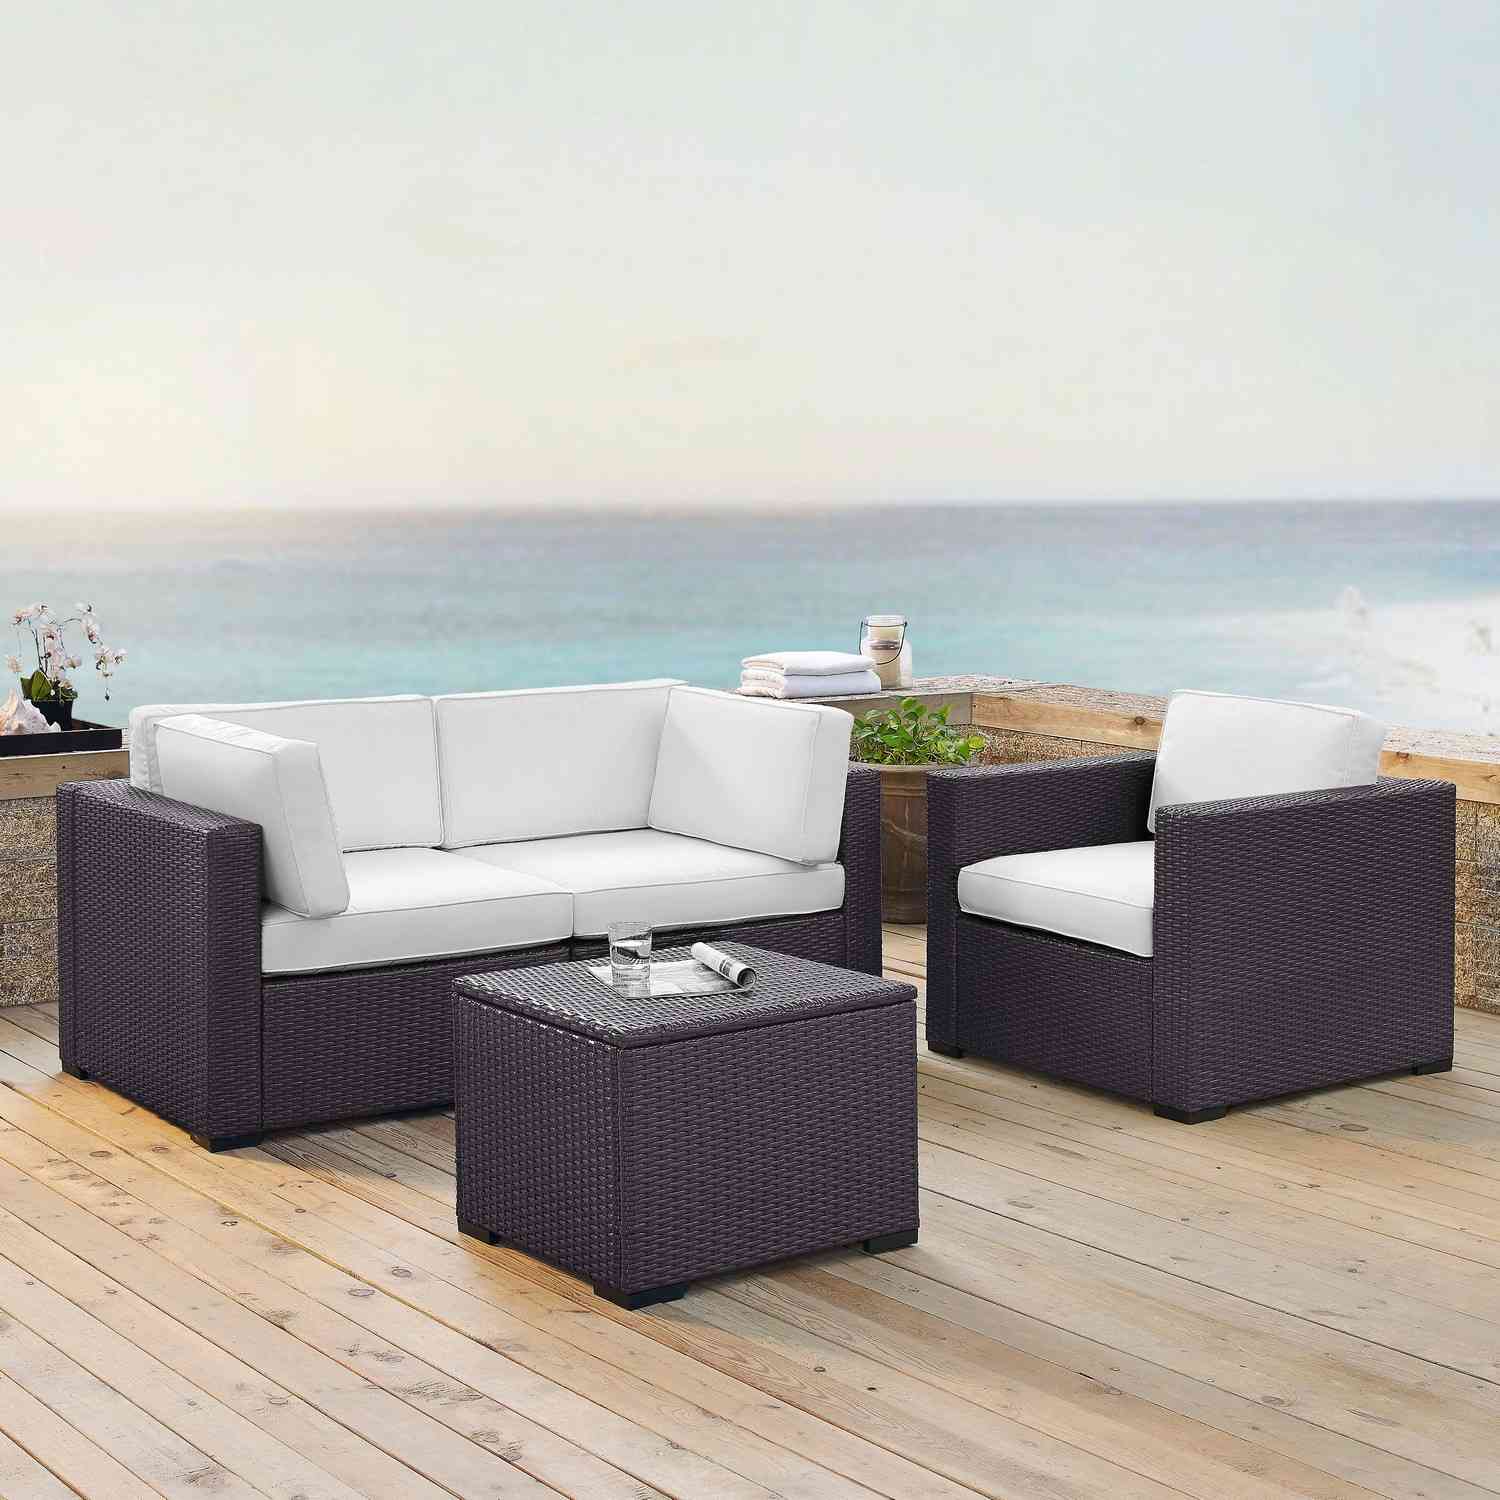 Crosley Biscayne 4-PC Outdoor Wicker Sectional Set - 2 Corner Chairs, Arm Chair, Coffee Table - White/Brown